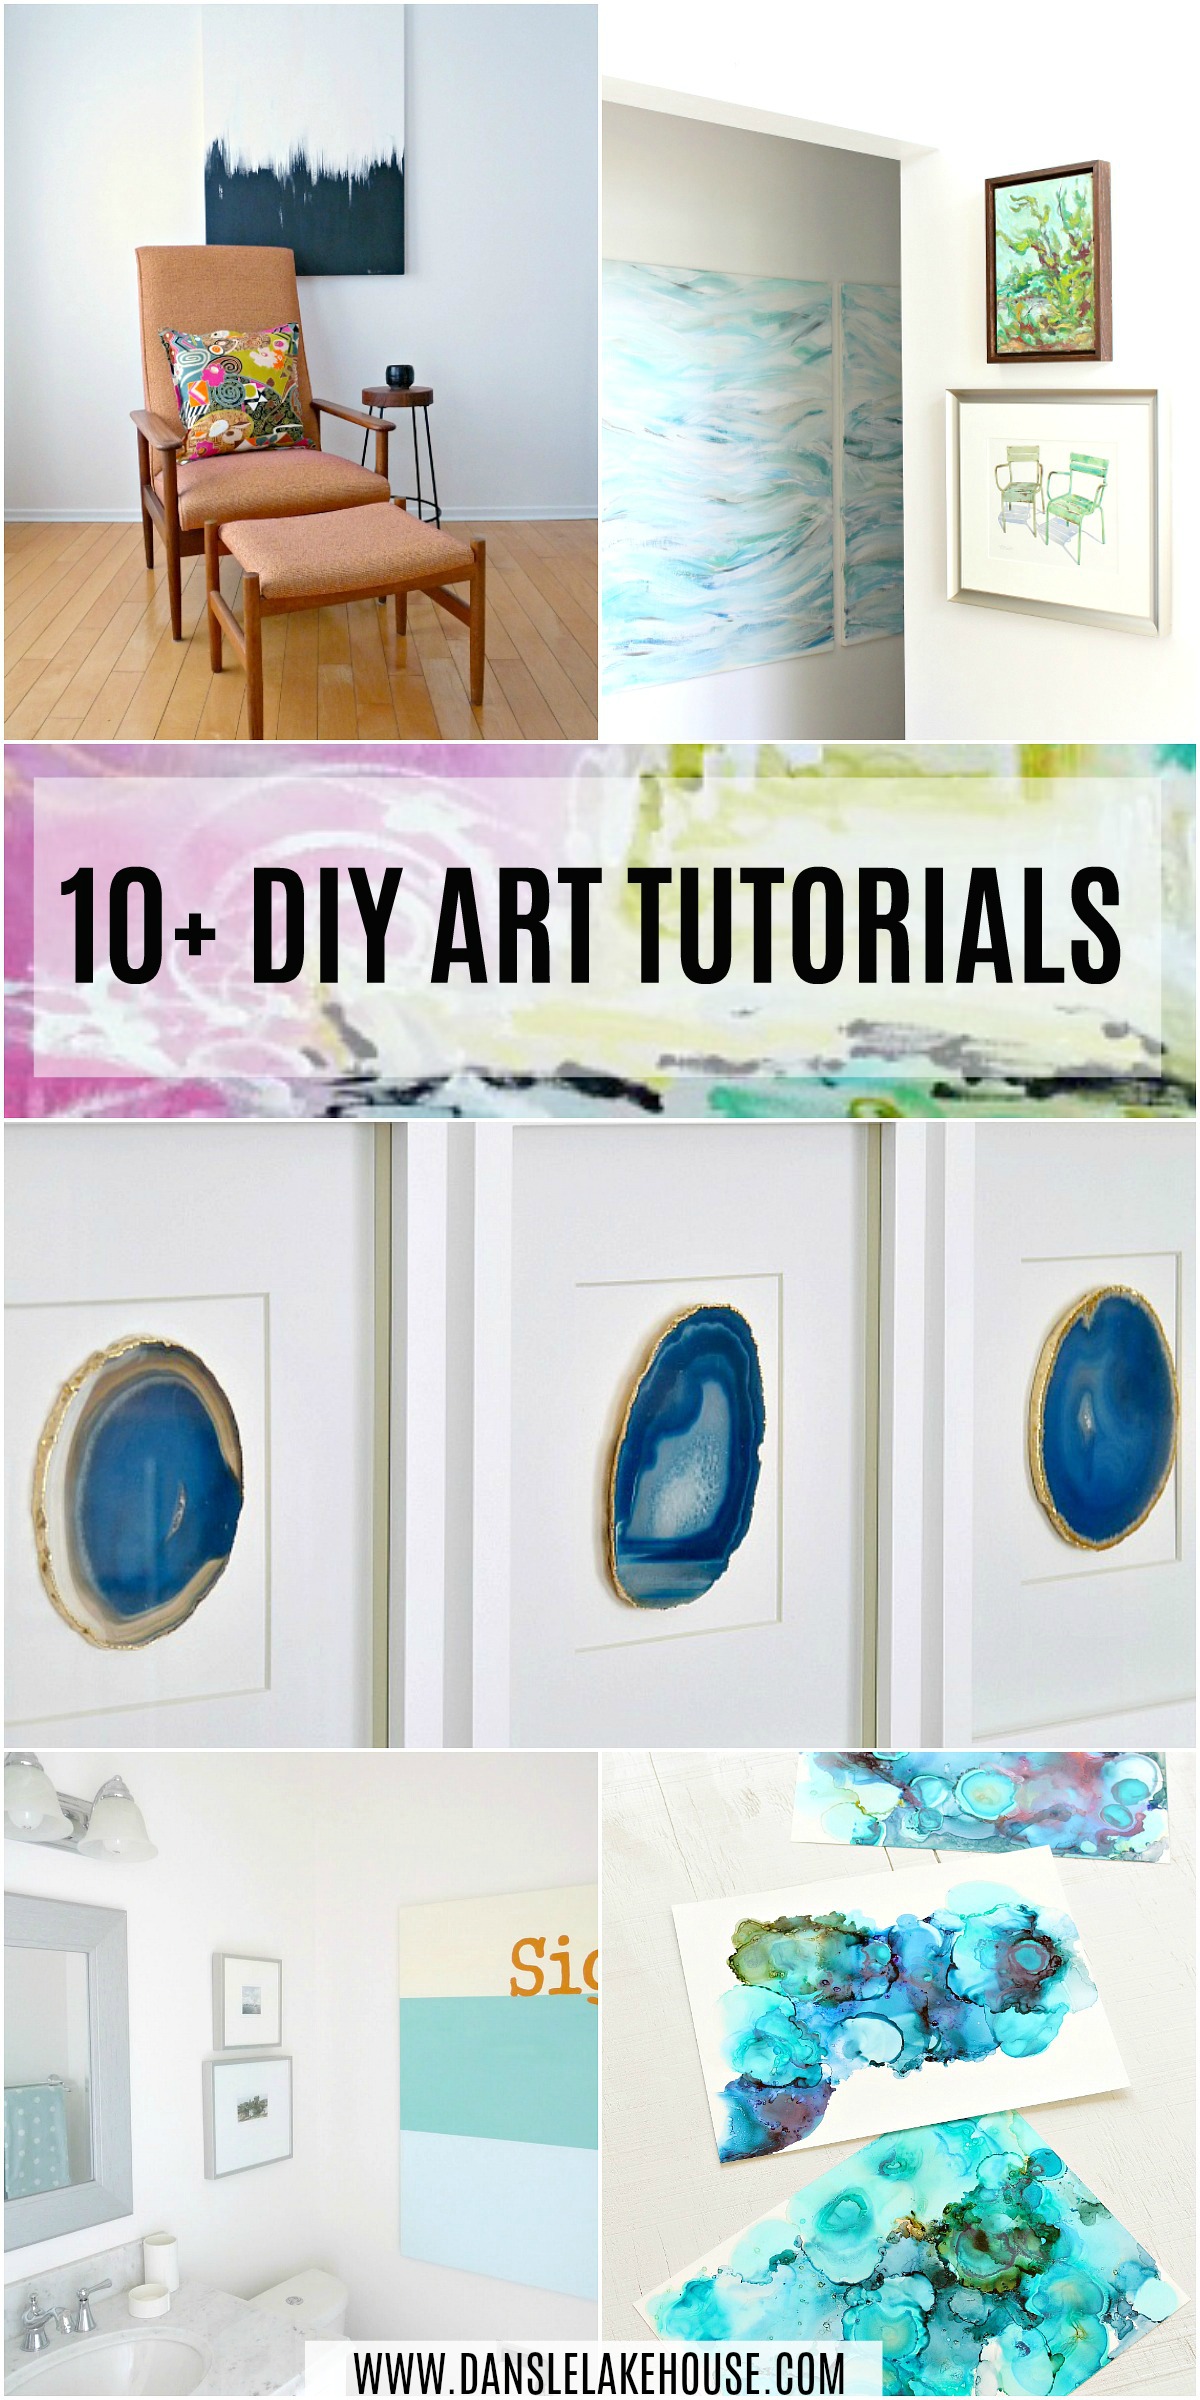 10+ DIY Art Project Tutorials Plus Learn How to Frame Canvas Art